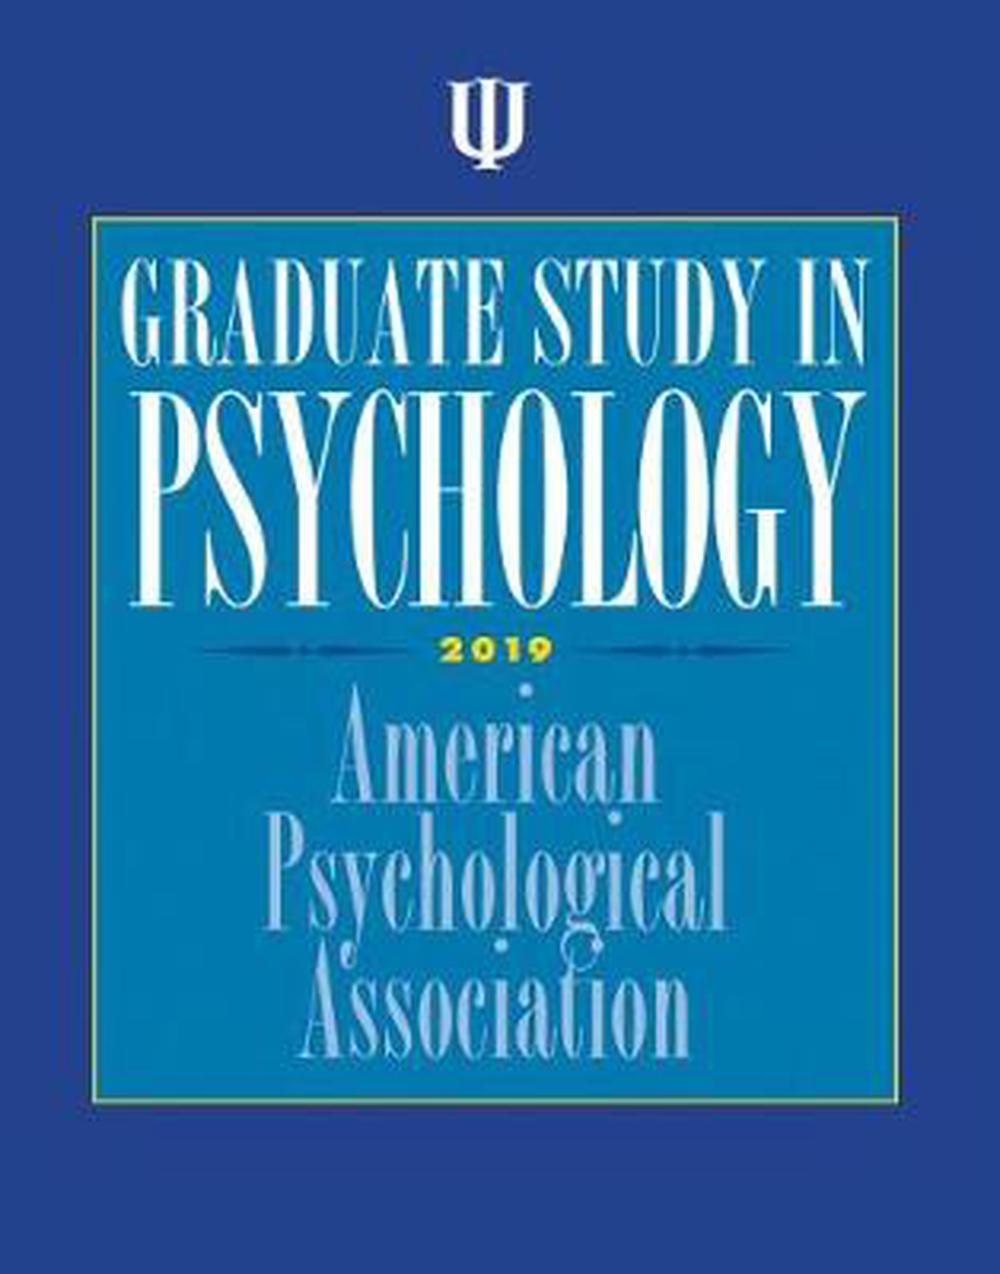 Graduate Study in Psychology, 2019 Edition by American Psychological